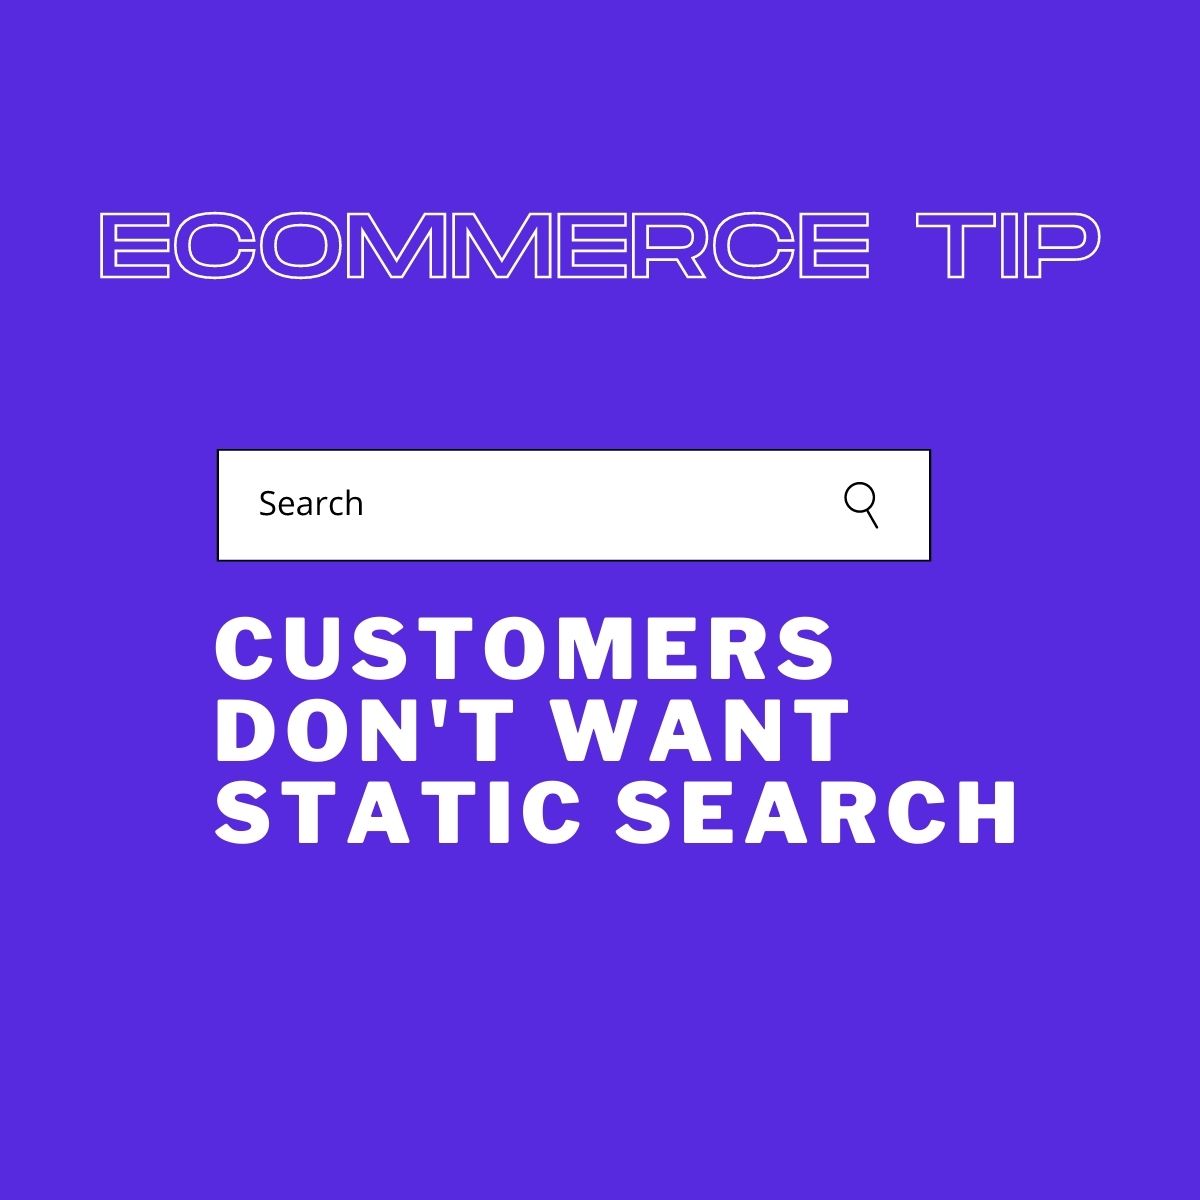 Customers don't want static search. They want interactive visual search.